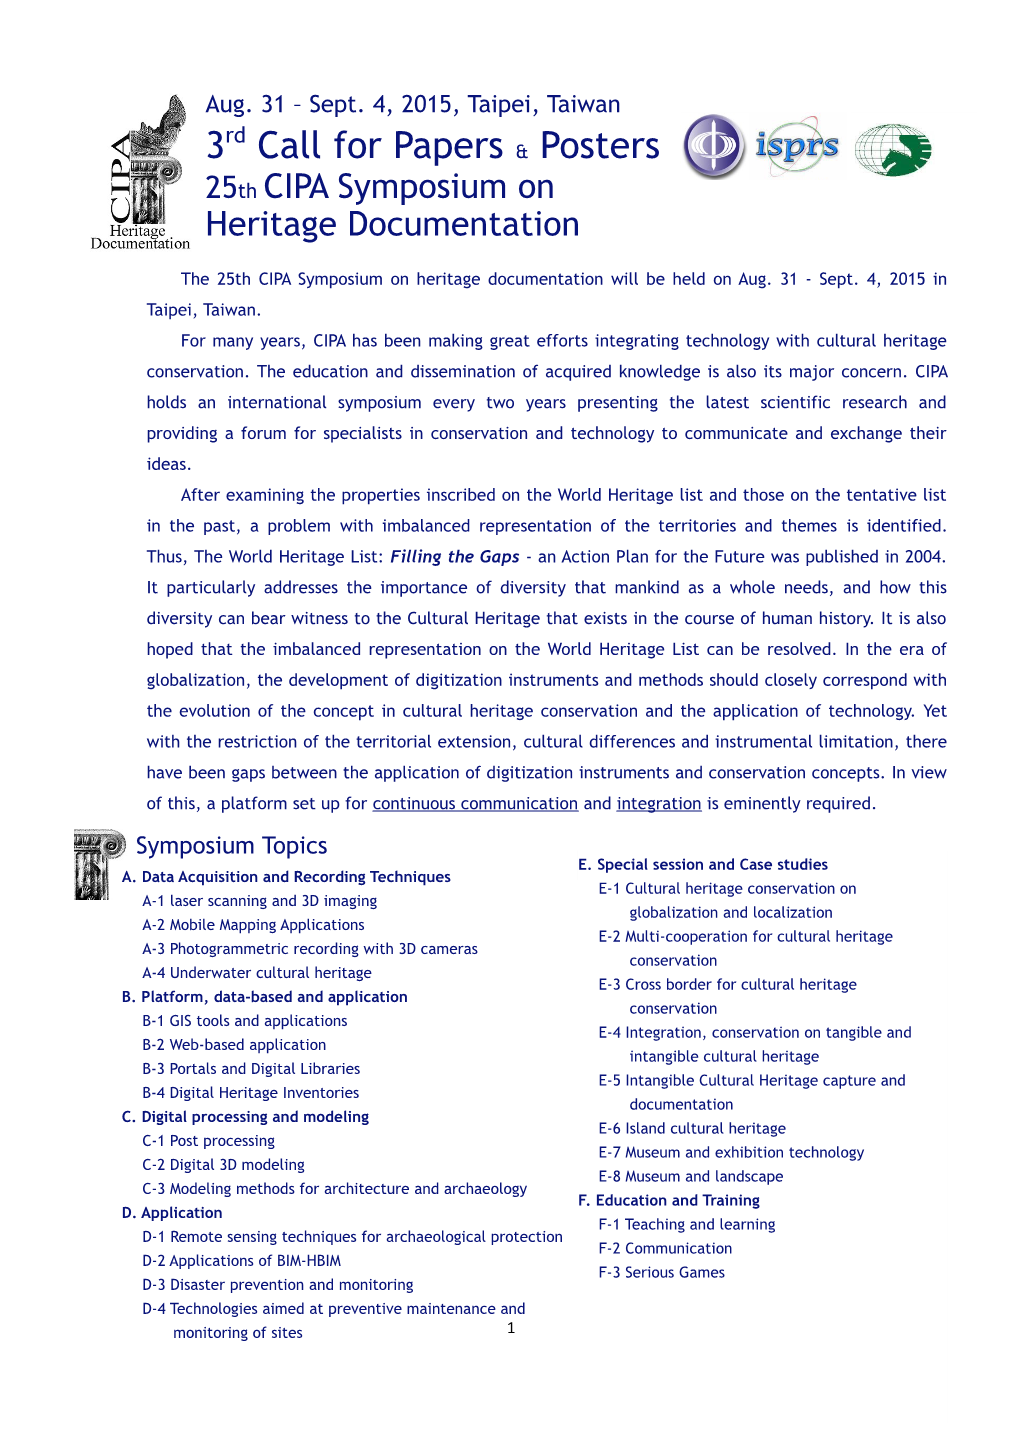 The 25Th CIPA Symposium on Heritage Documentation Will Be Held on Aug. 31 - Sept.4, 2015